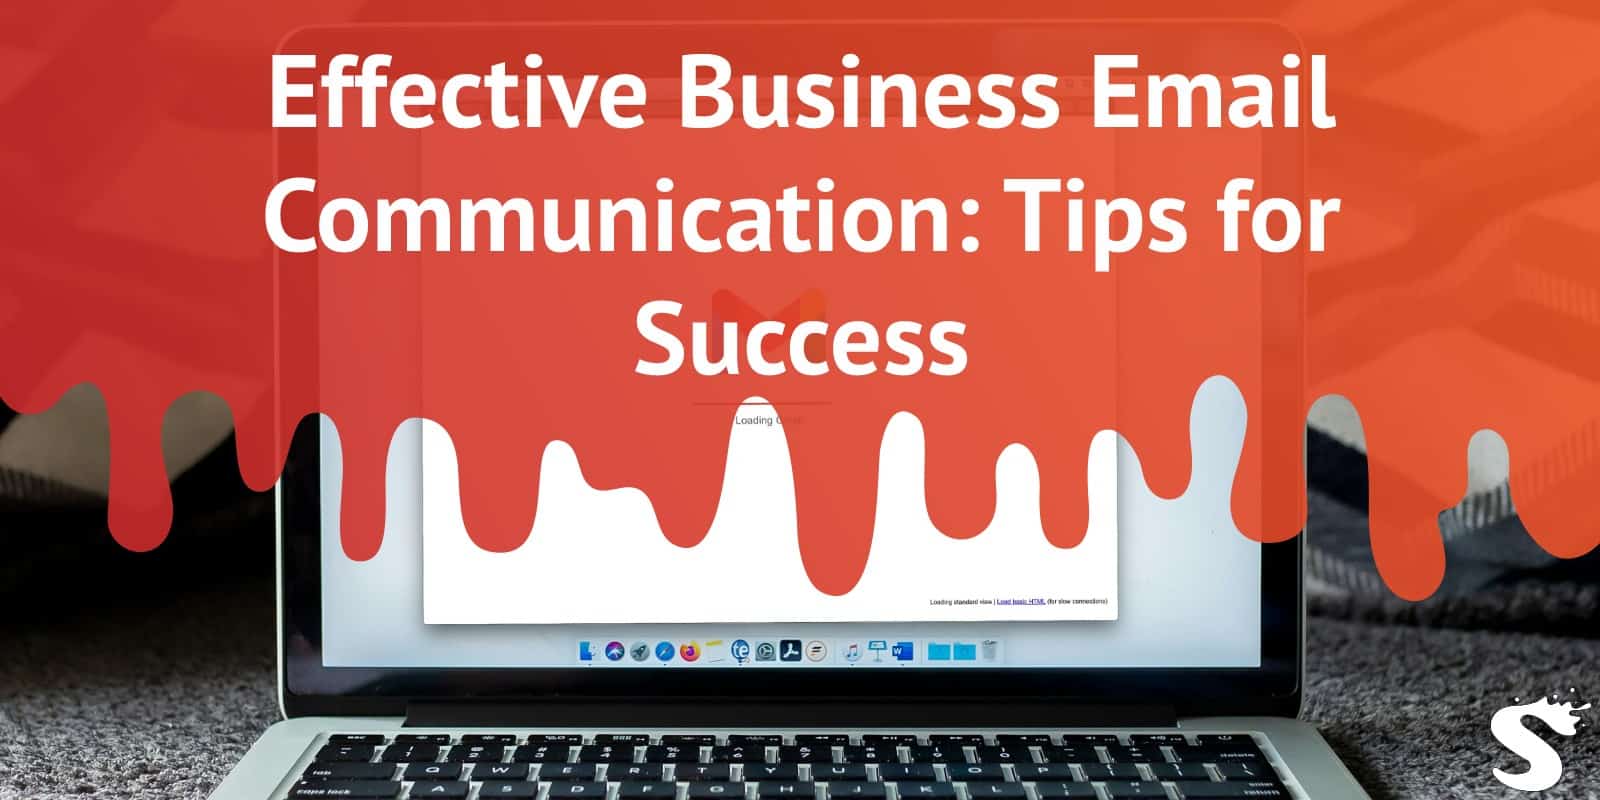 Effective Business Email Communication: Tips for Success